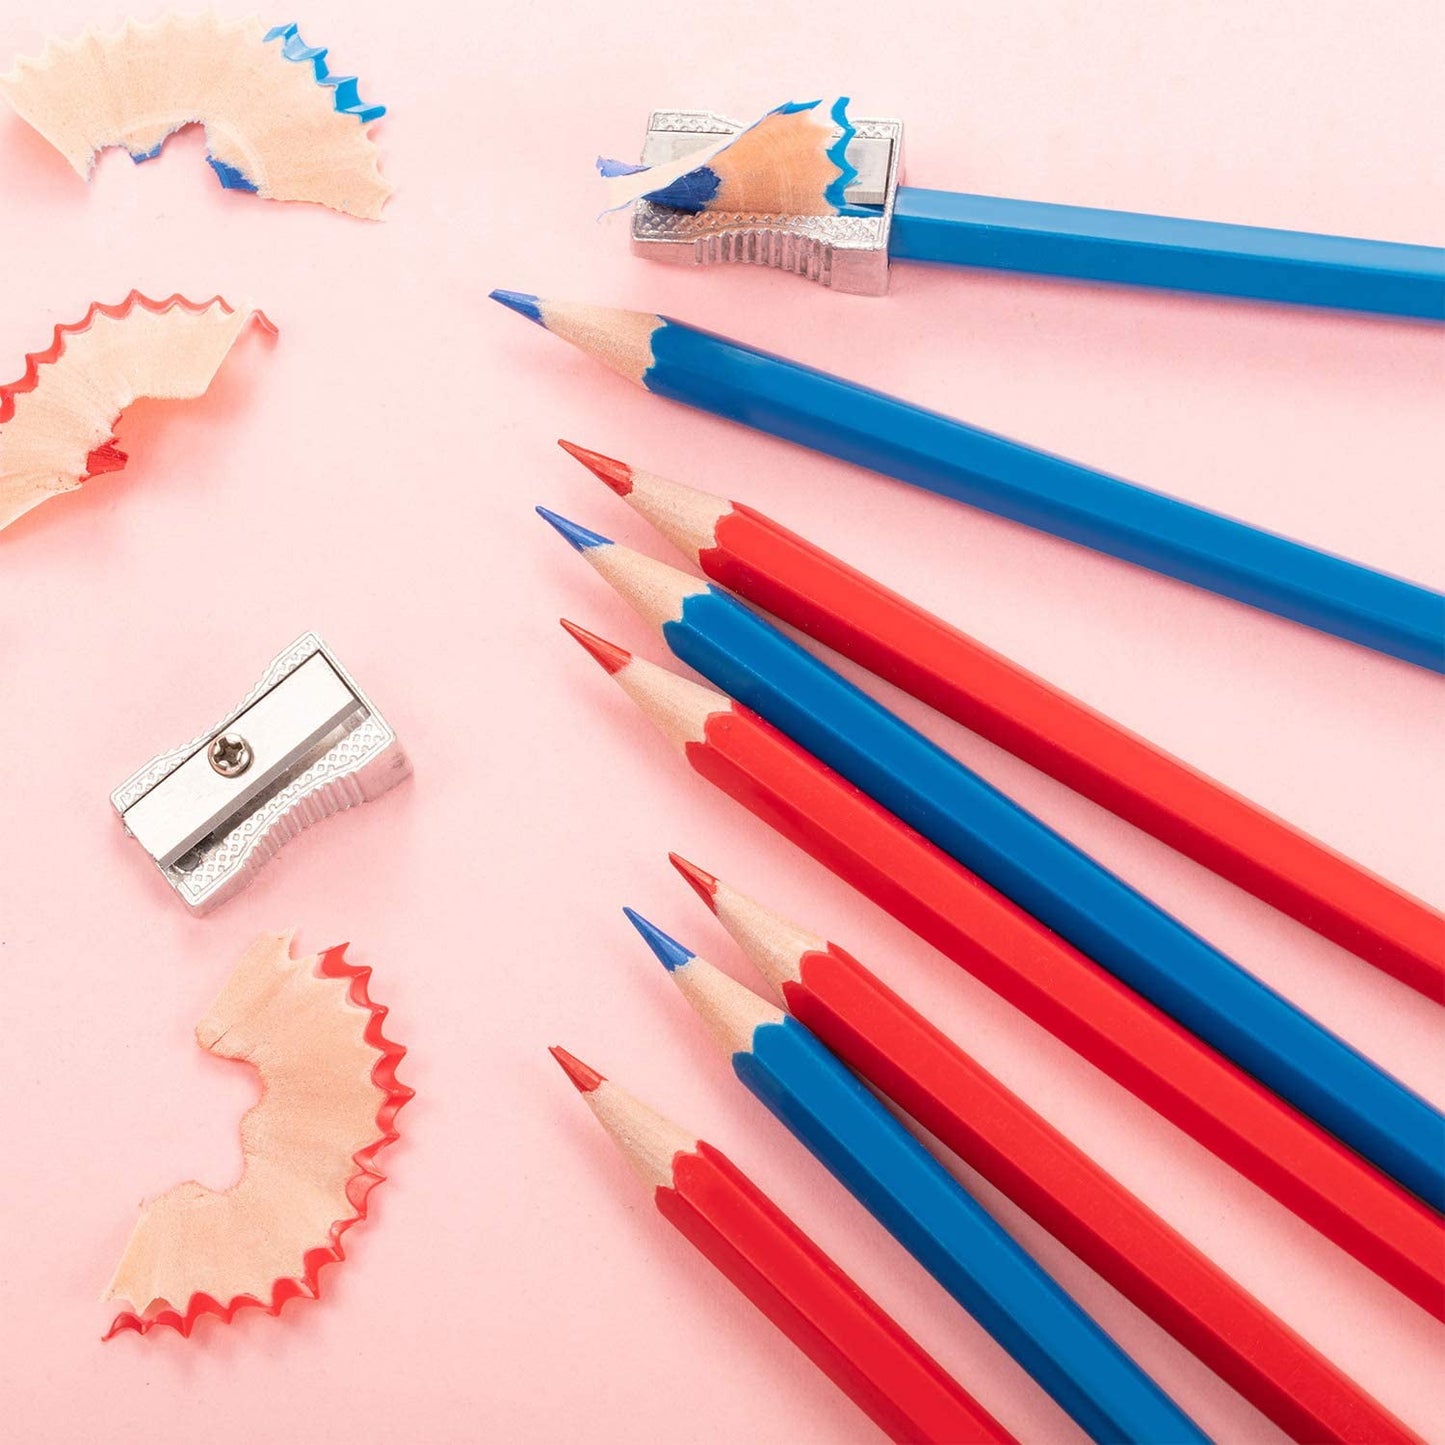 40 Counts Erasable Colored Pencils Red Blue Colored Pencils with Eraser and 2 Pieces Mini Metal Pencil Sharpeners